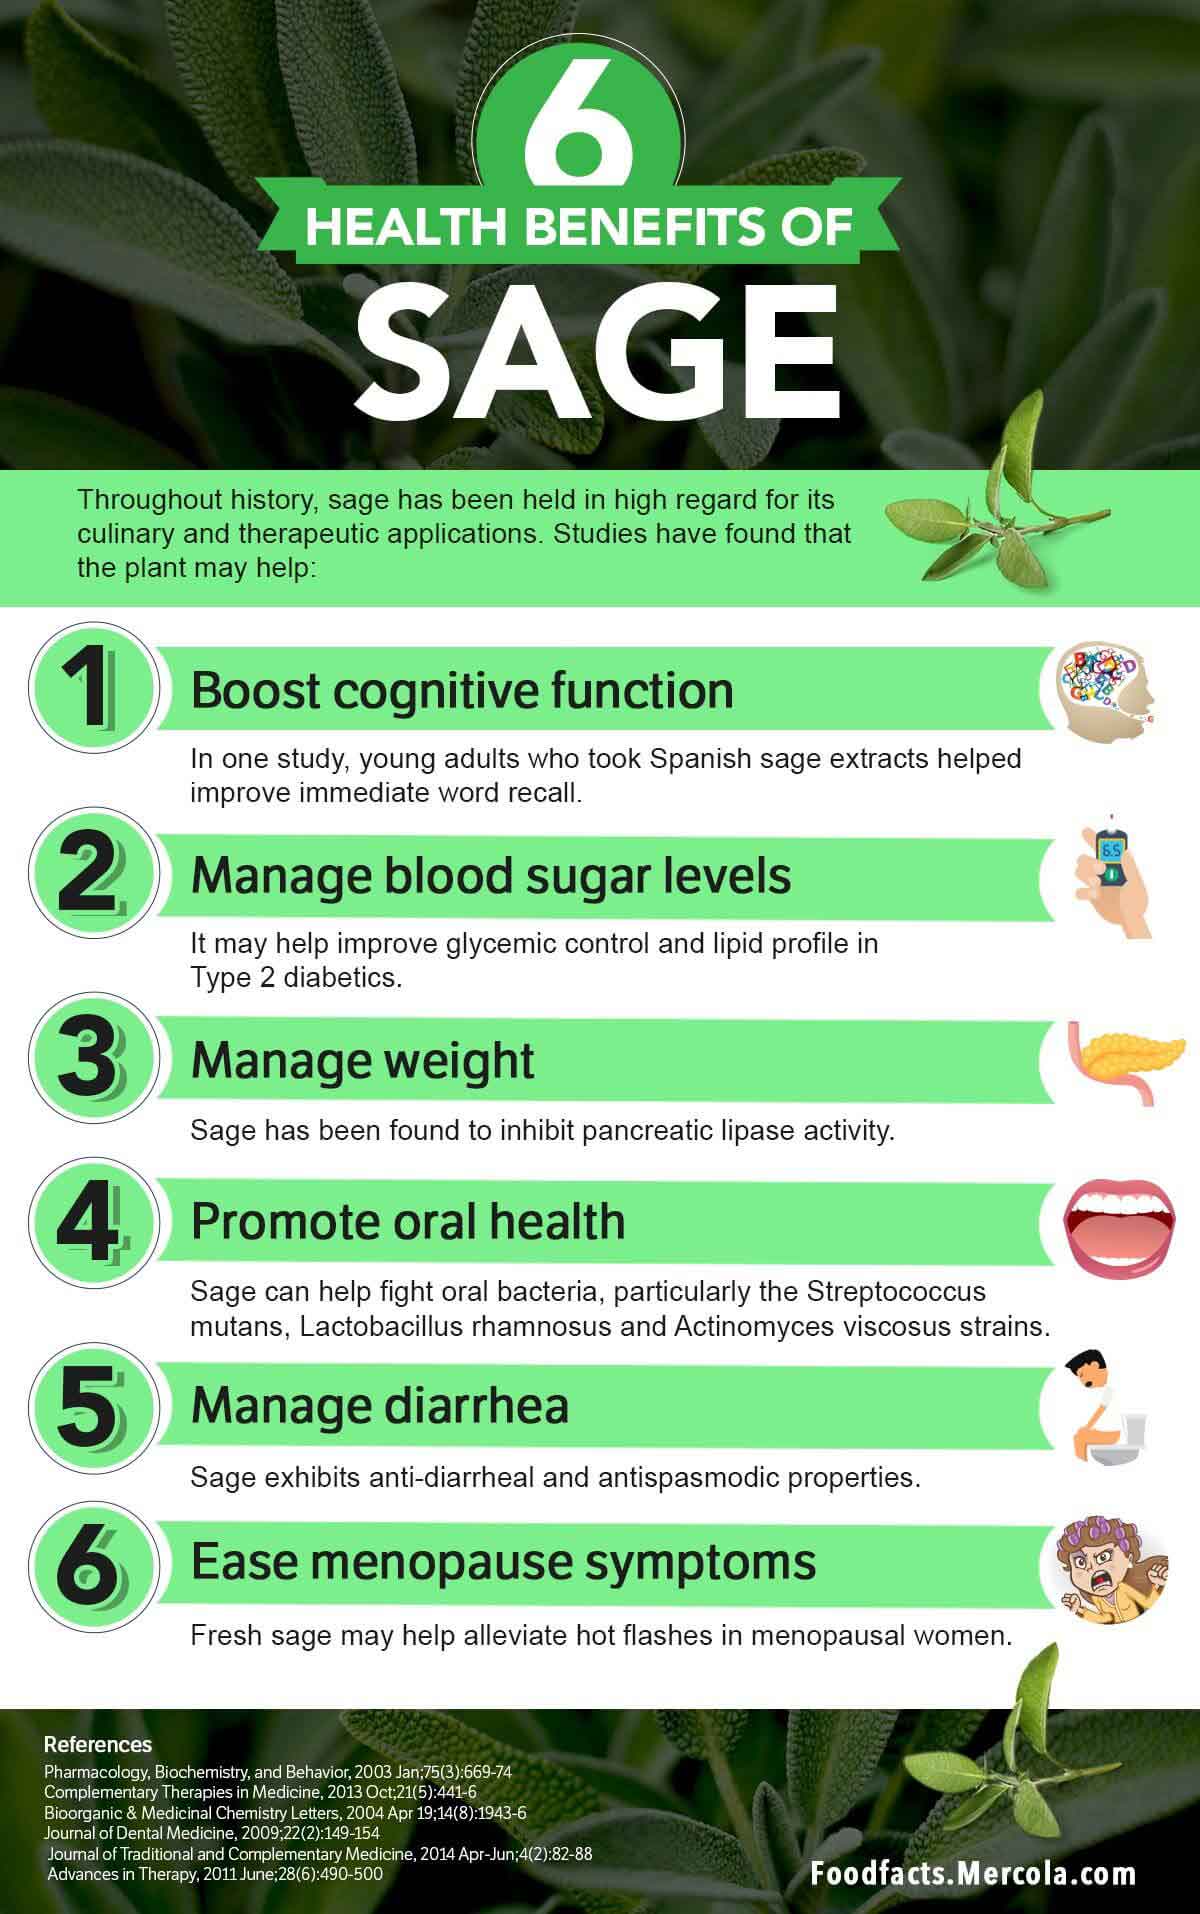 What Is Sage Used For?